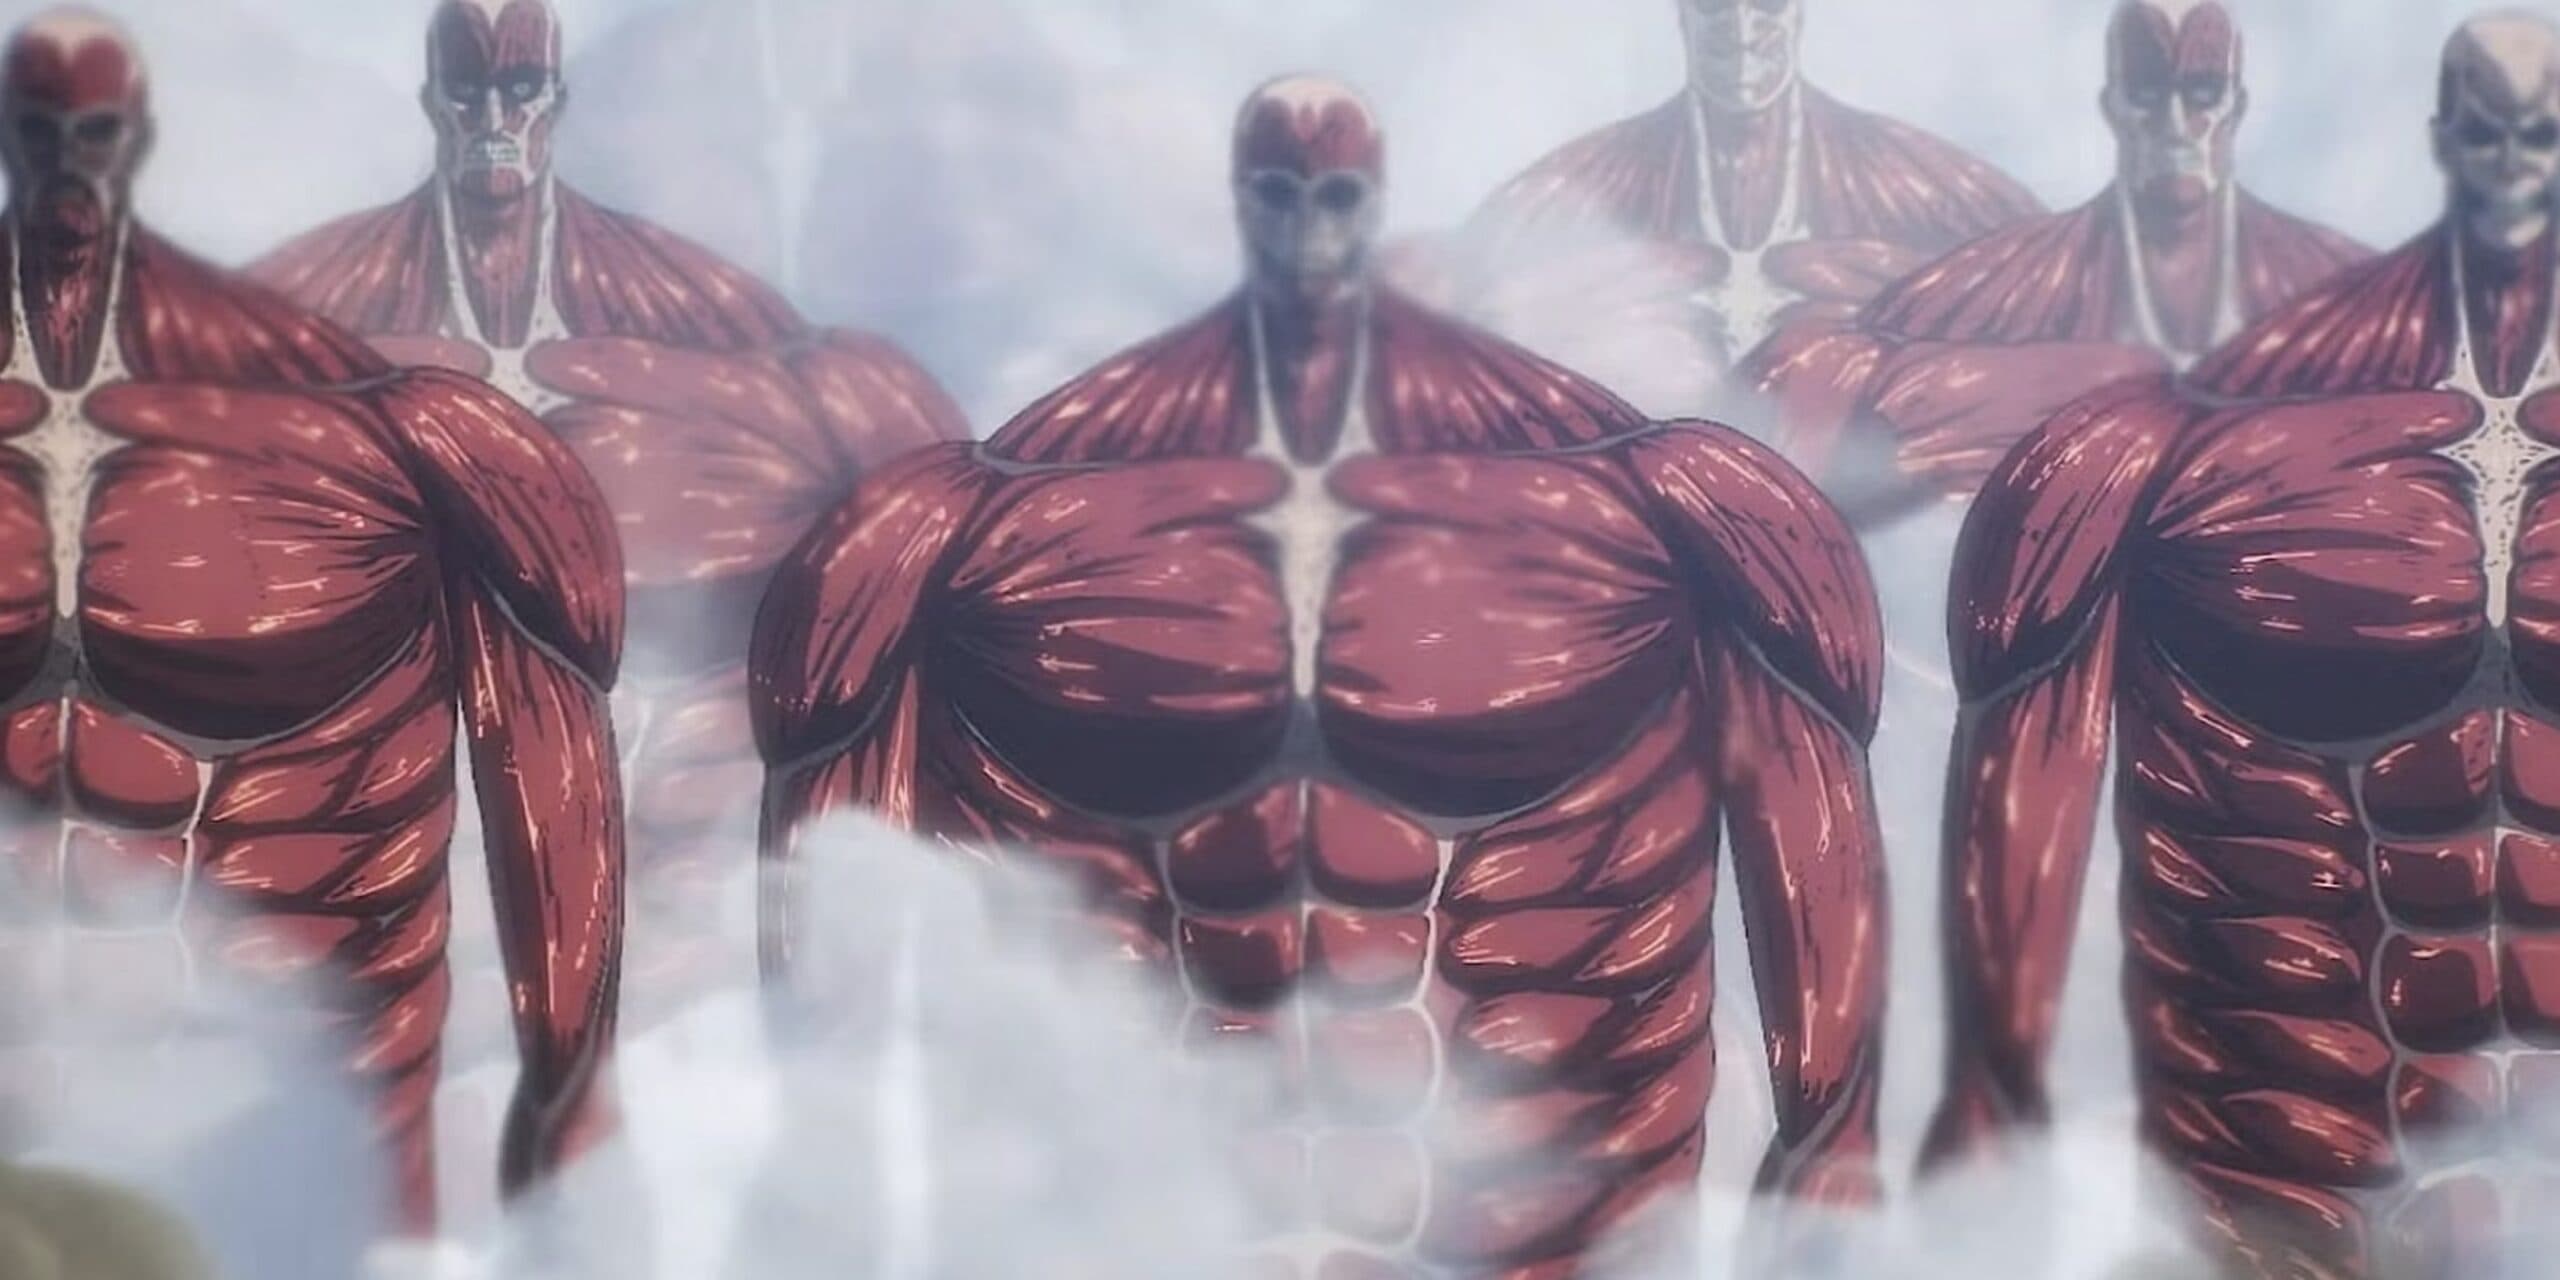 Top 10 Tallest Titans in Attack on Titan Ranked